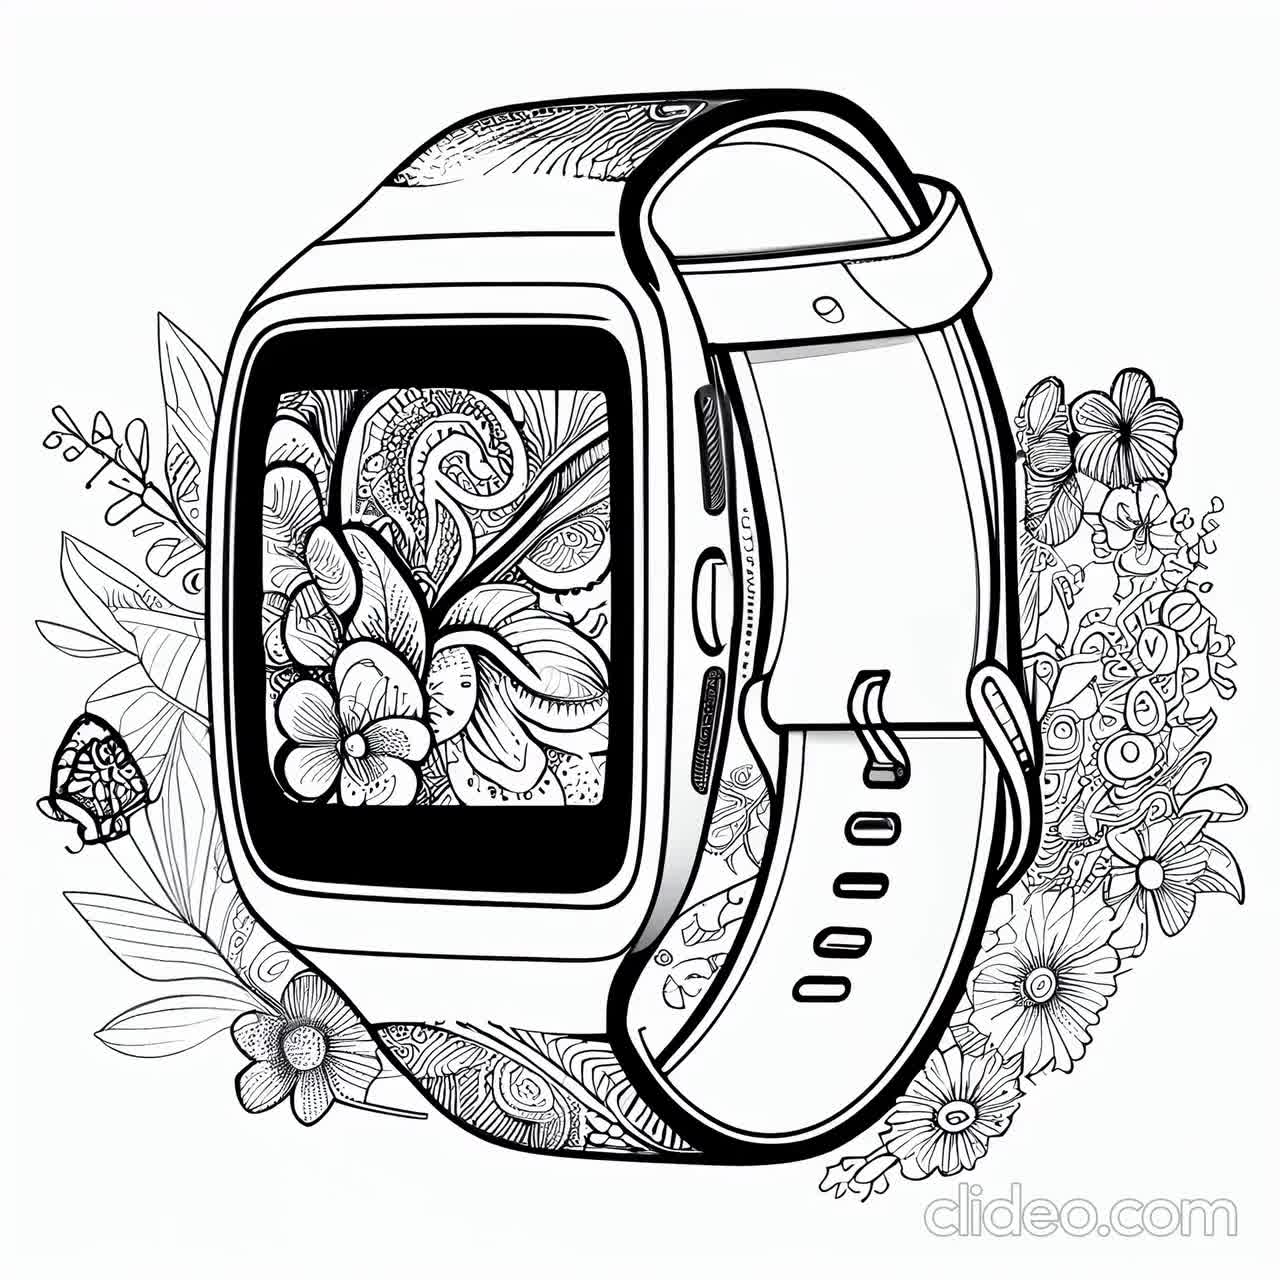 Smartwatch coloring pages color your way to a smarter future instant pdf download for print and online use print paint download now